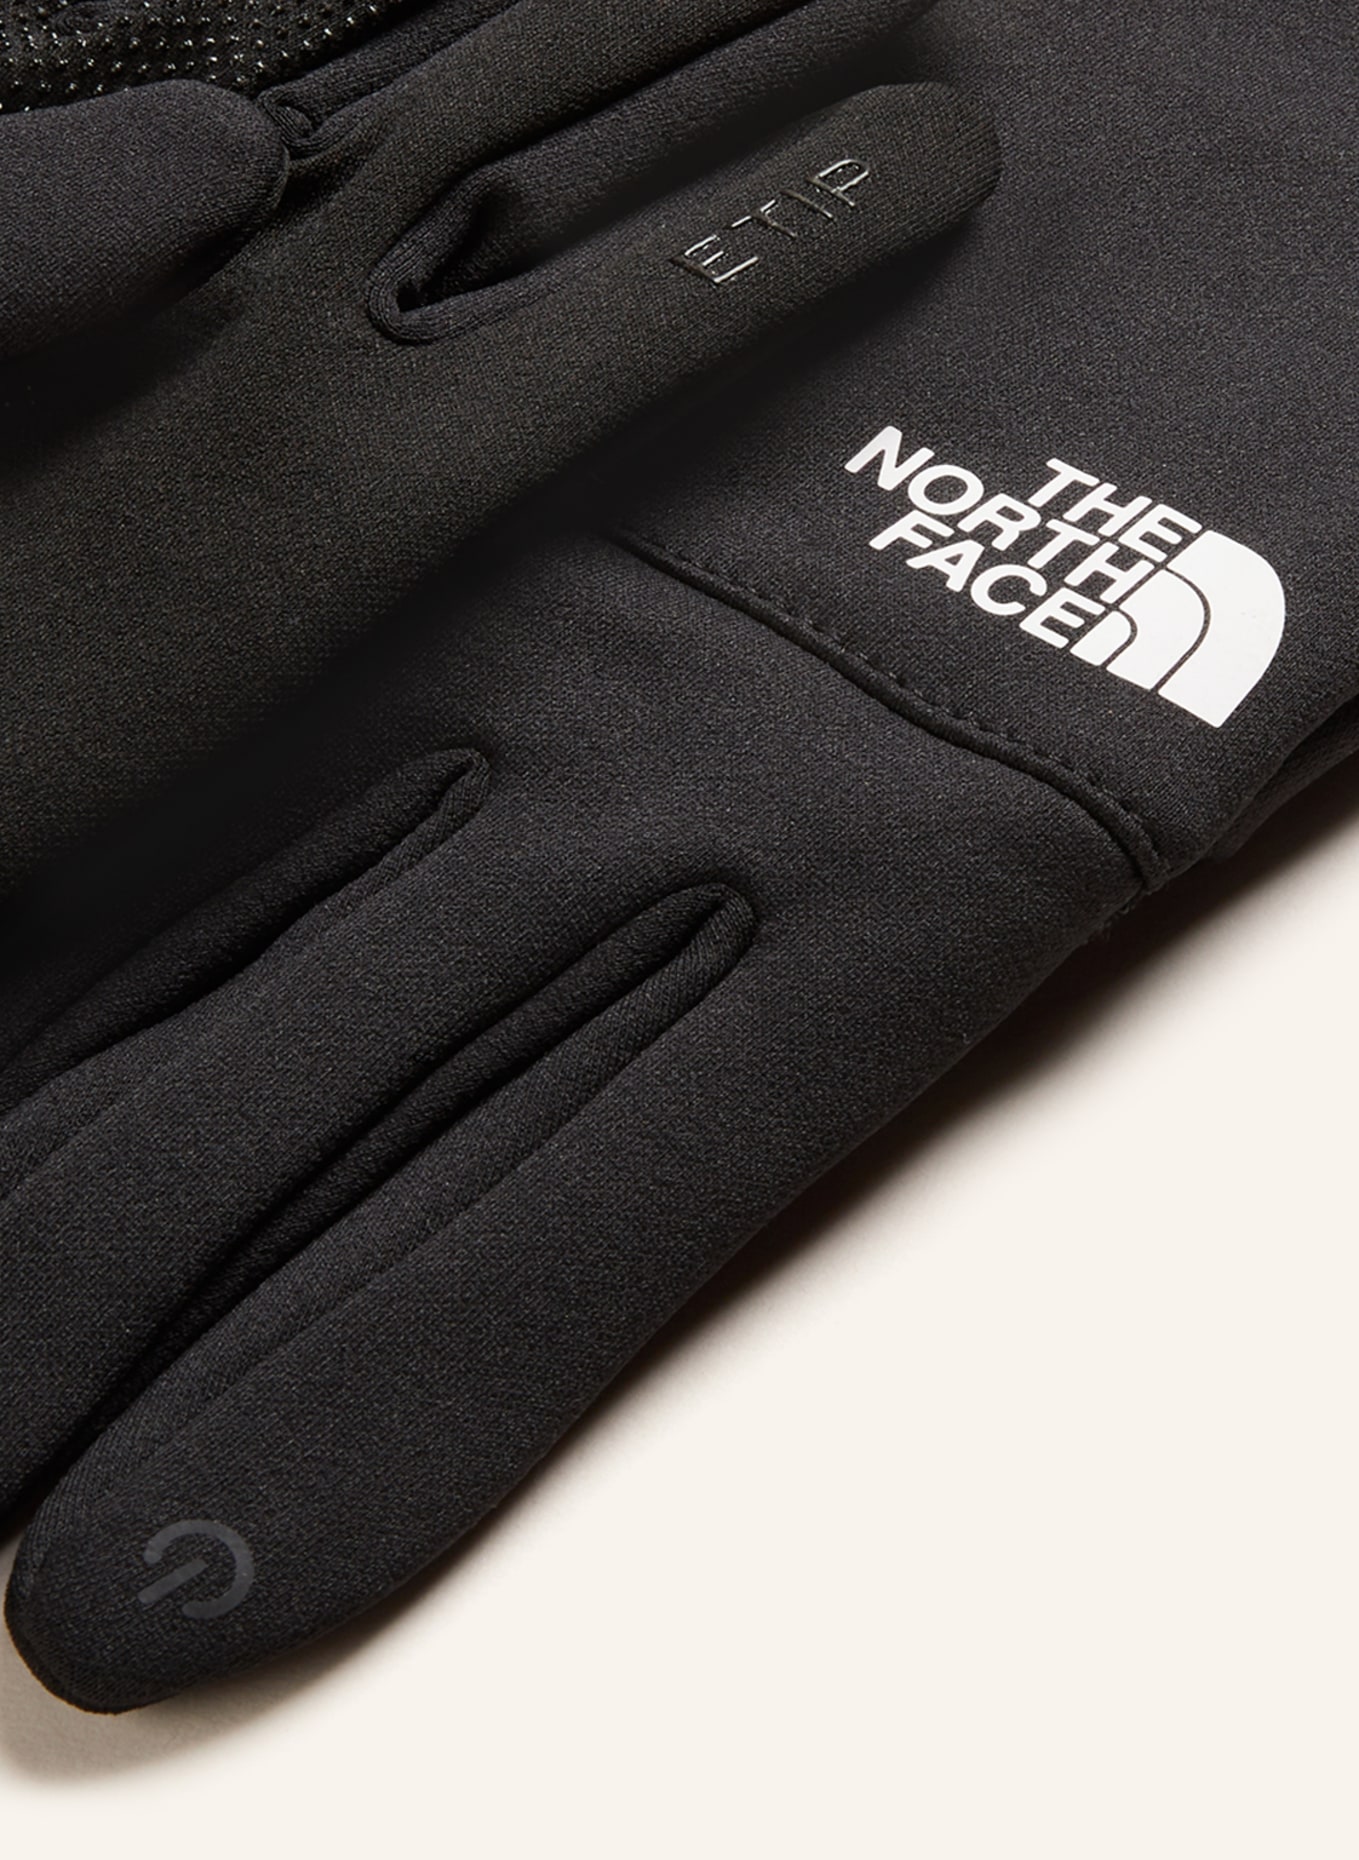 THE NORTH FACE Multisport gloves touchscreen white black/ ETIP function with in